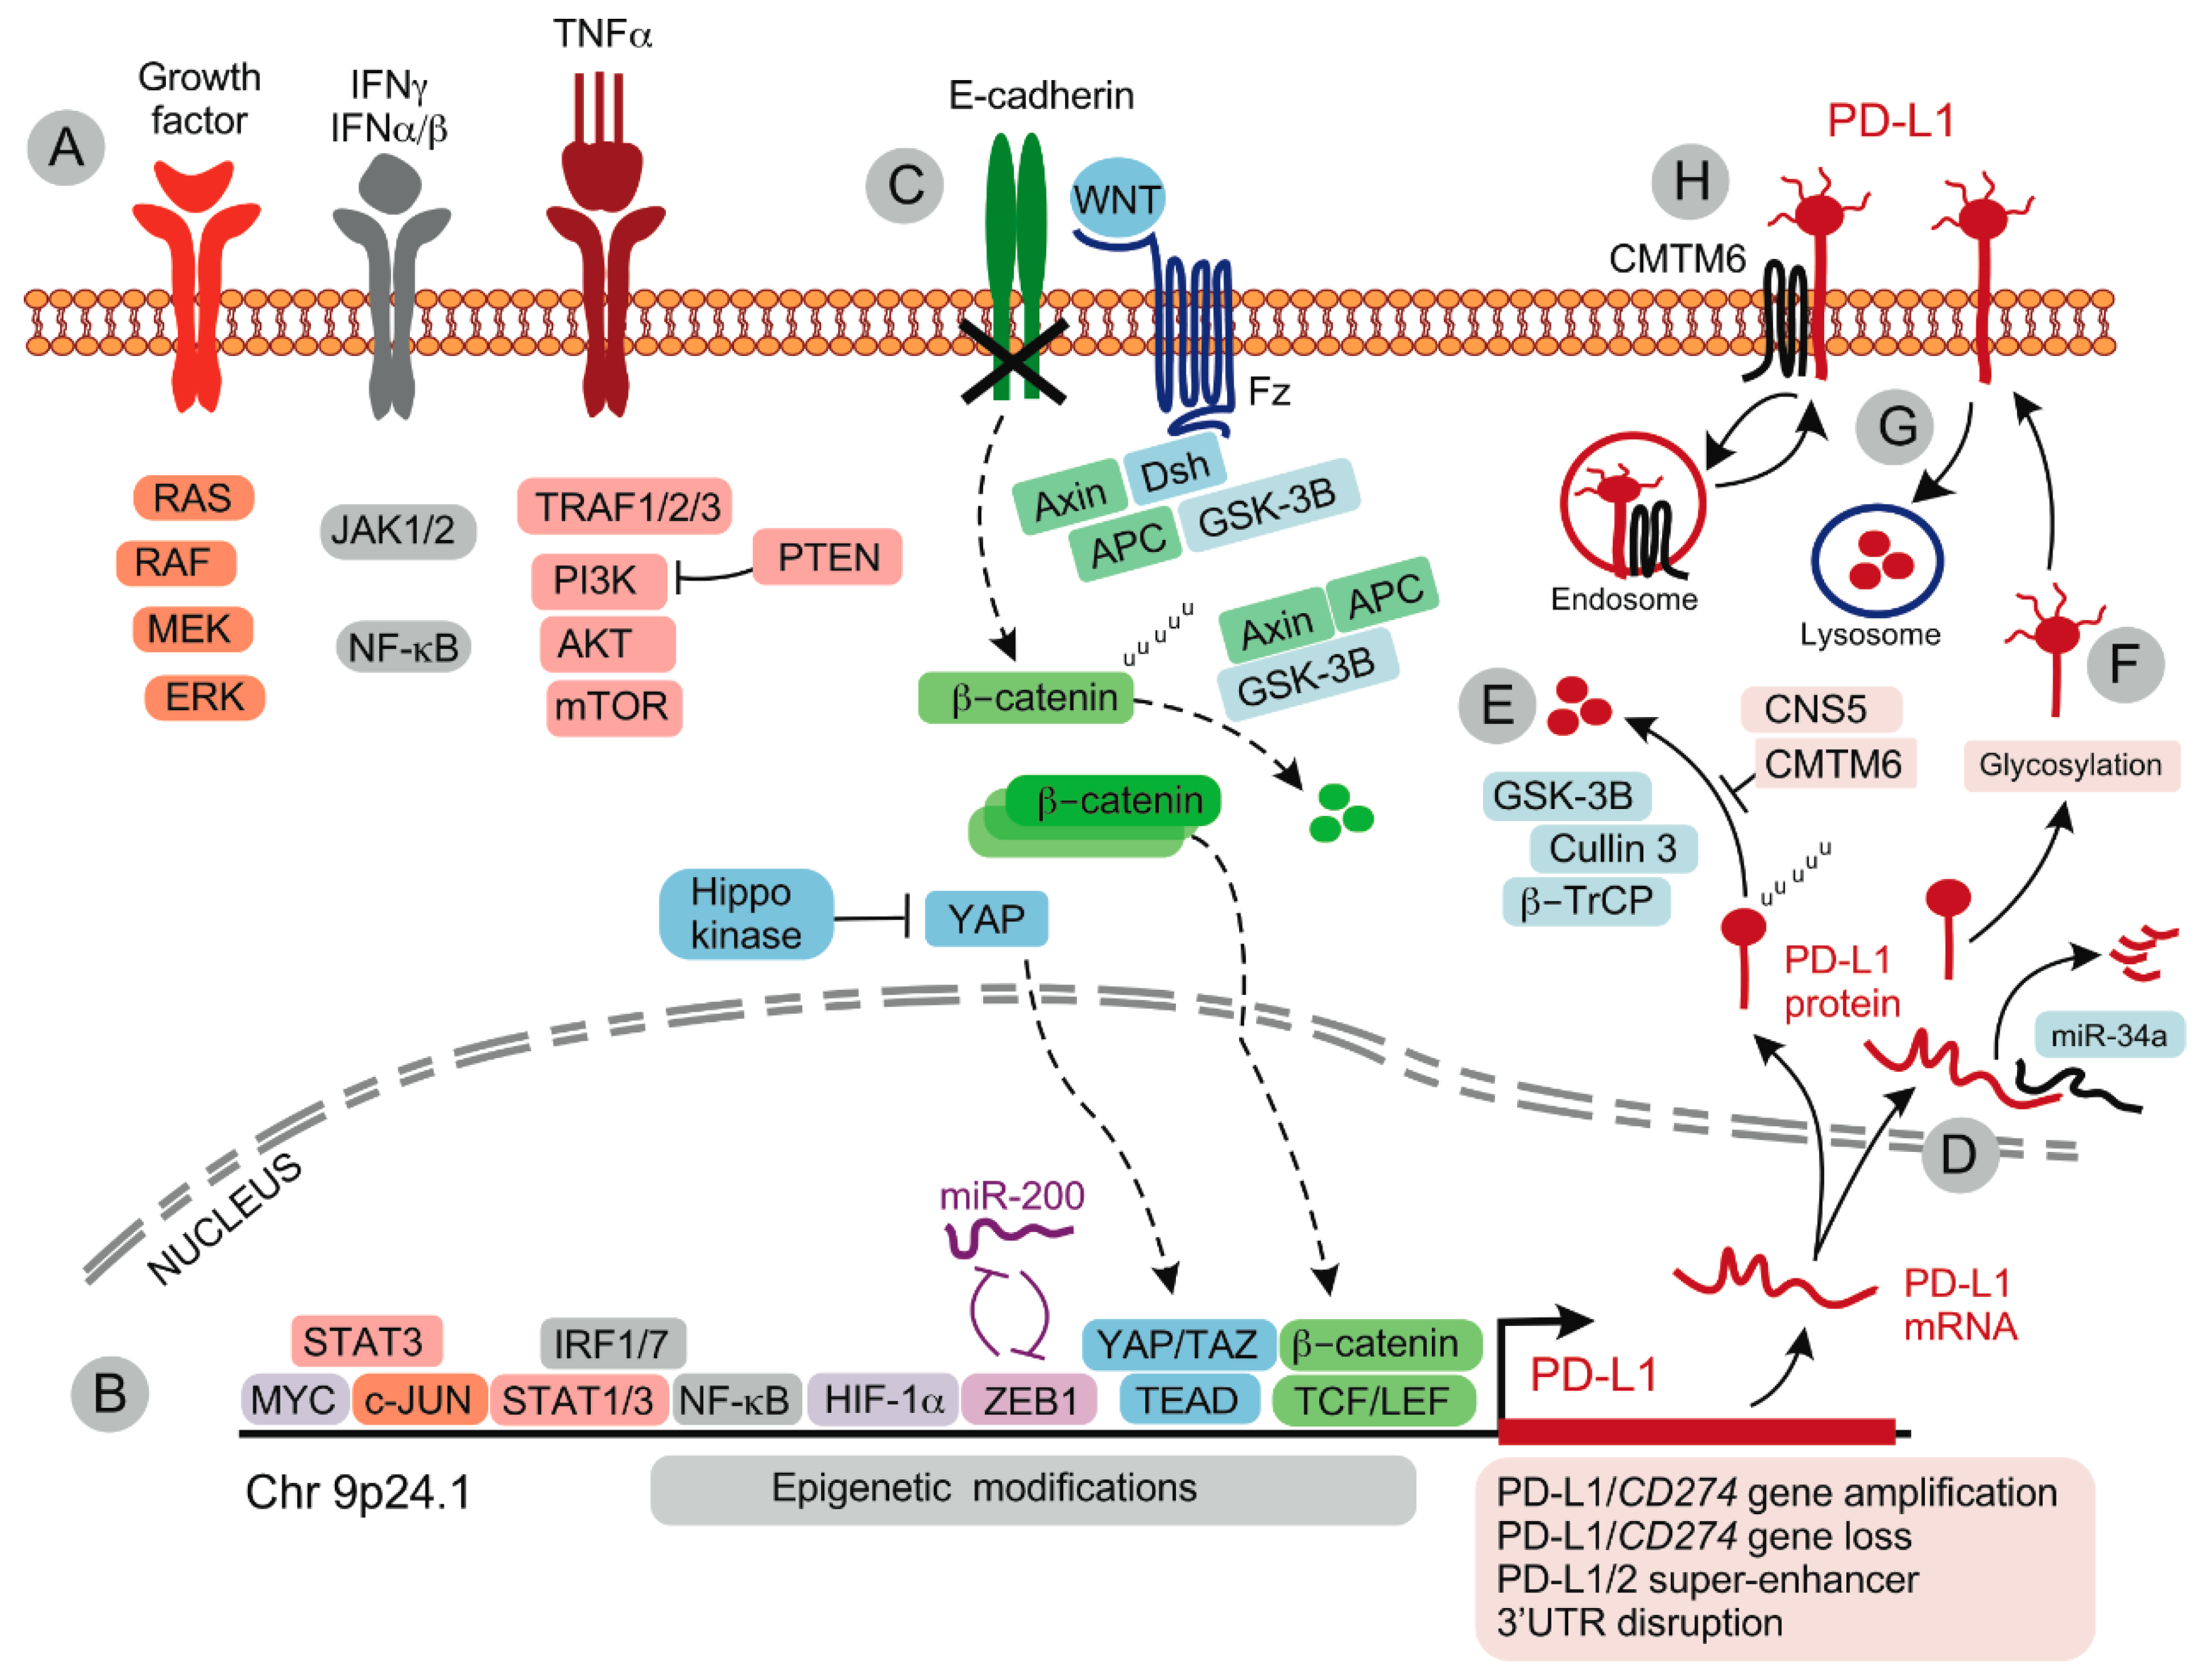 Spatial and Temporal Changes in PD-L1 Expression in Cancer: The Role of Genetic Drivers, Tumor Microenvironment and Resistance to Therapy